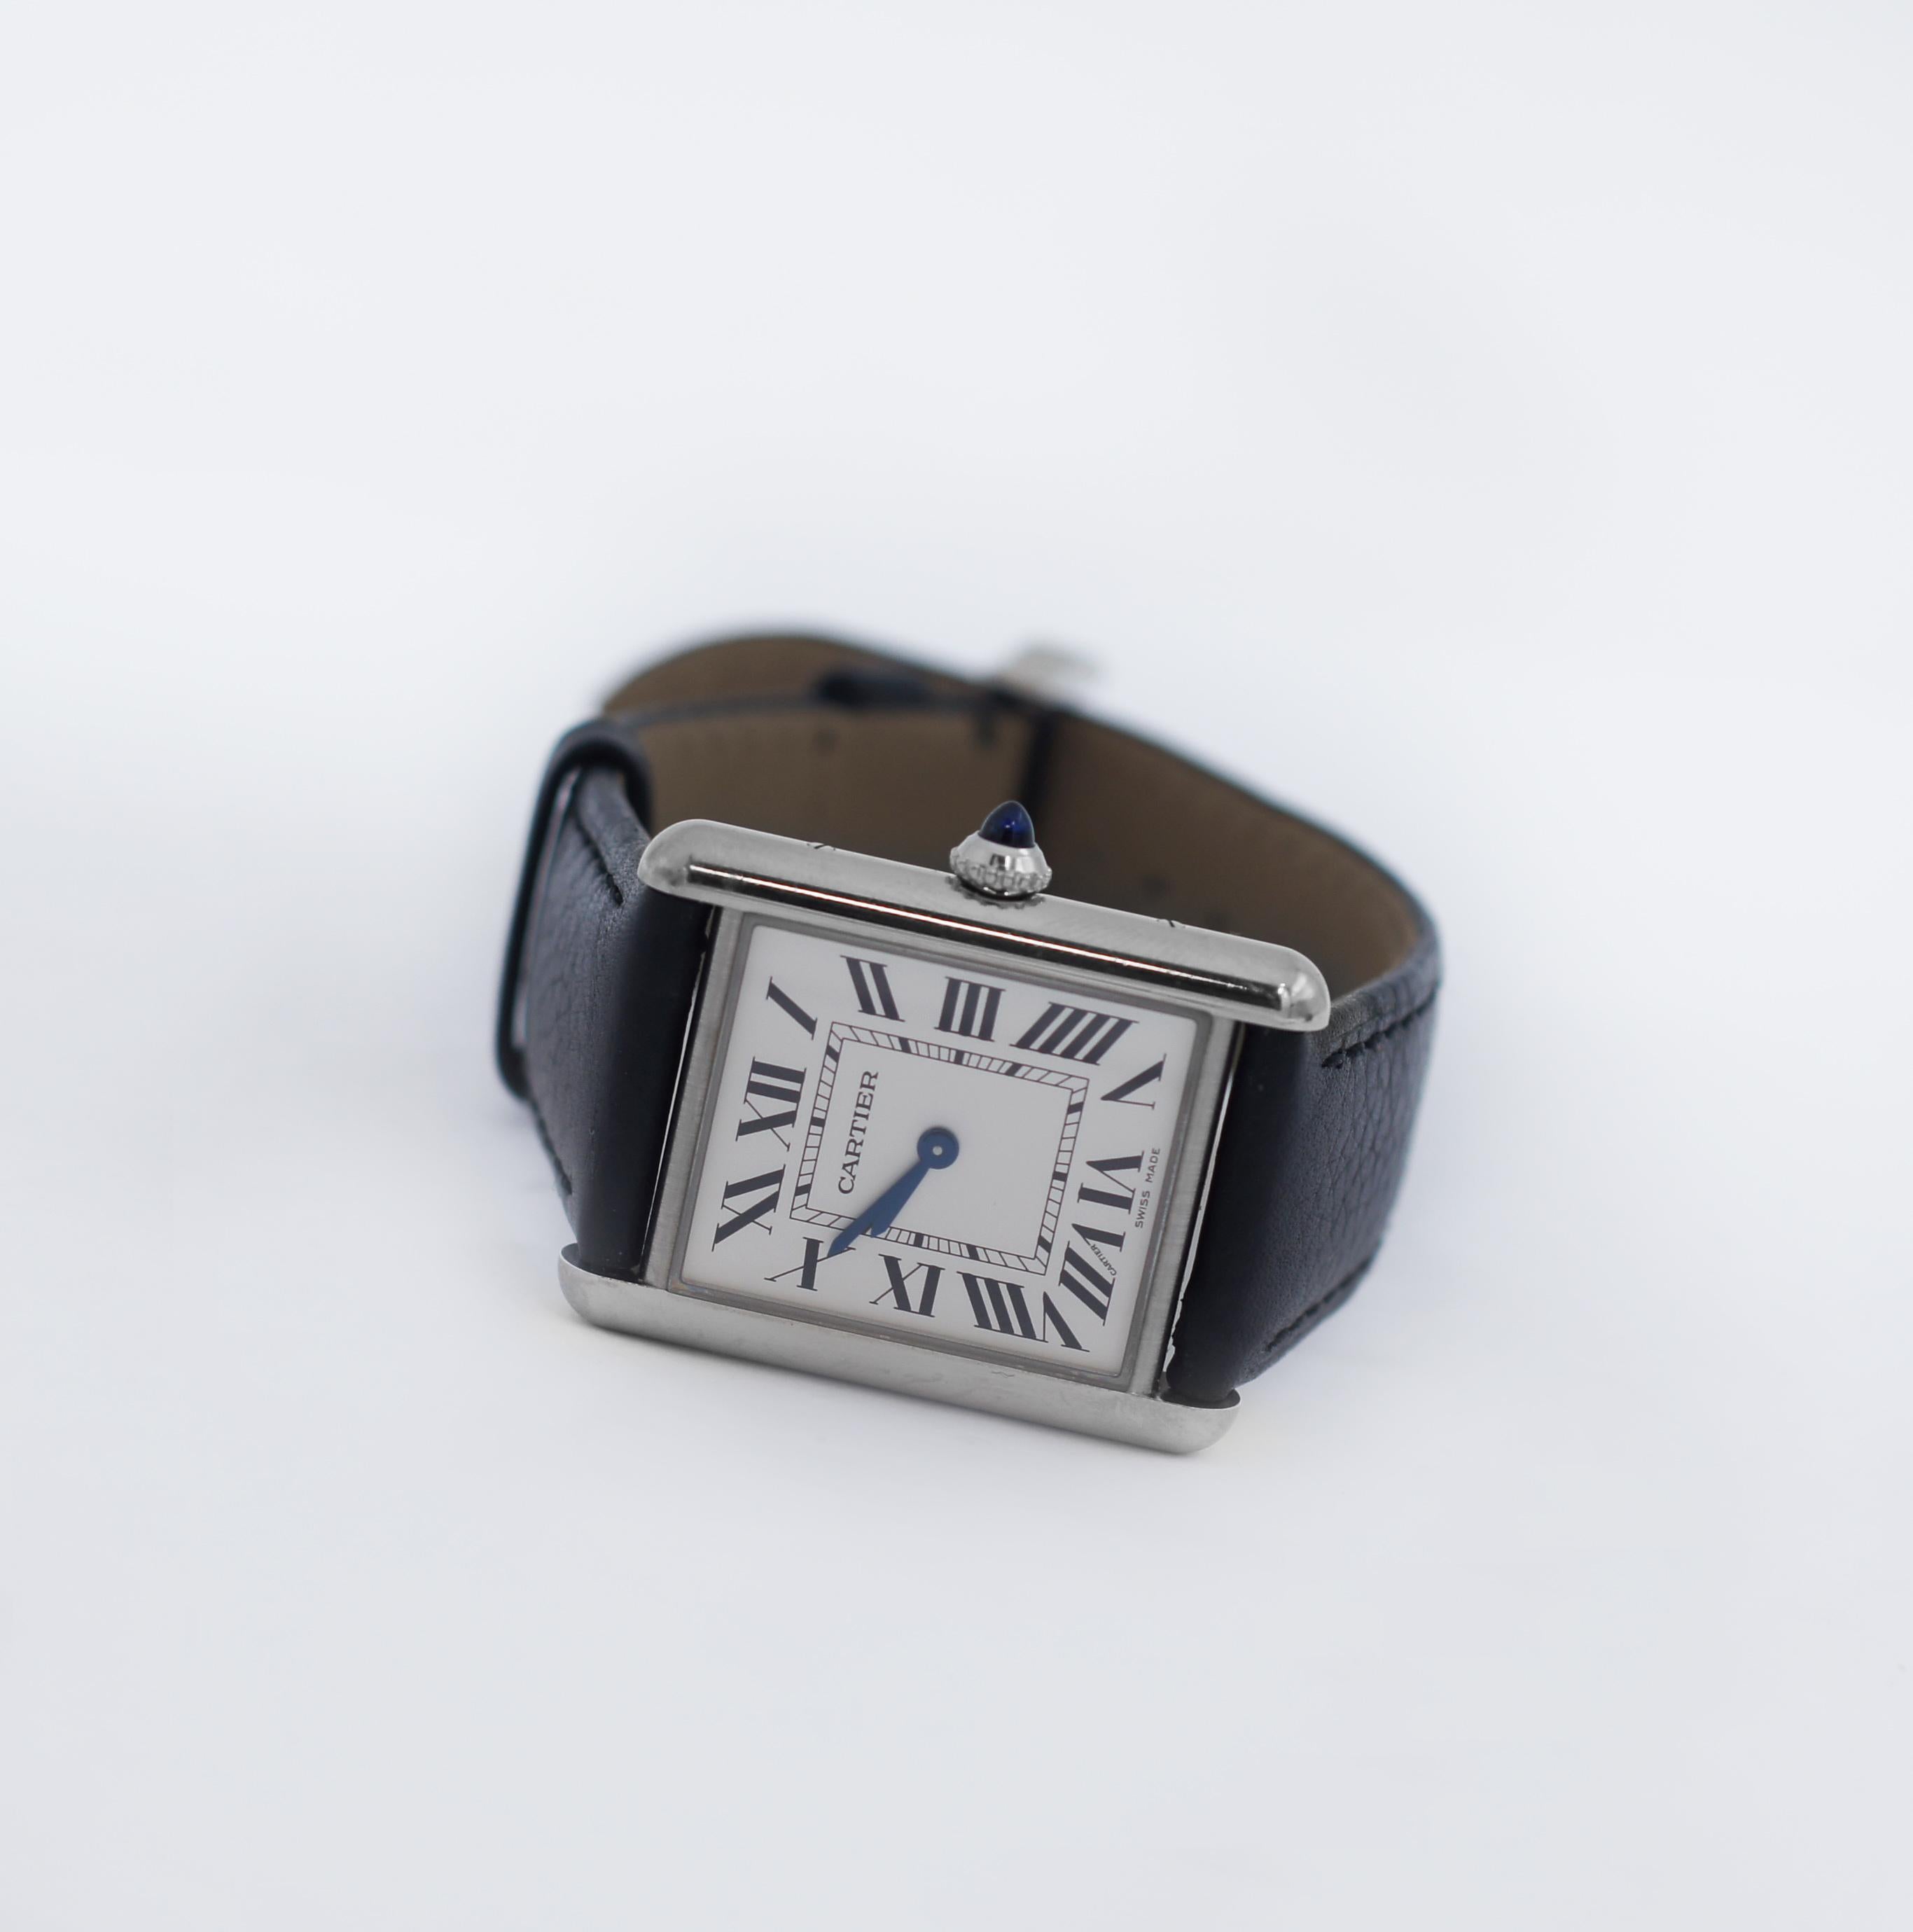 CARTIER TANK MUST WATCH
large model
high autonomy quartz movement
Steel case
beaded crown set with a synthetic cabochon-shaped spinel
silvered dial
blued-steel sword-shaped hands
interchangeable black grained calfskin strap
steel ardillon